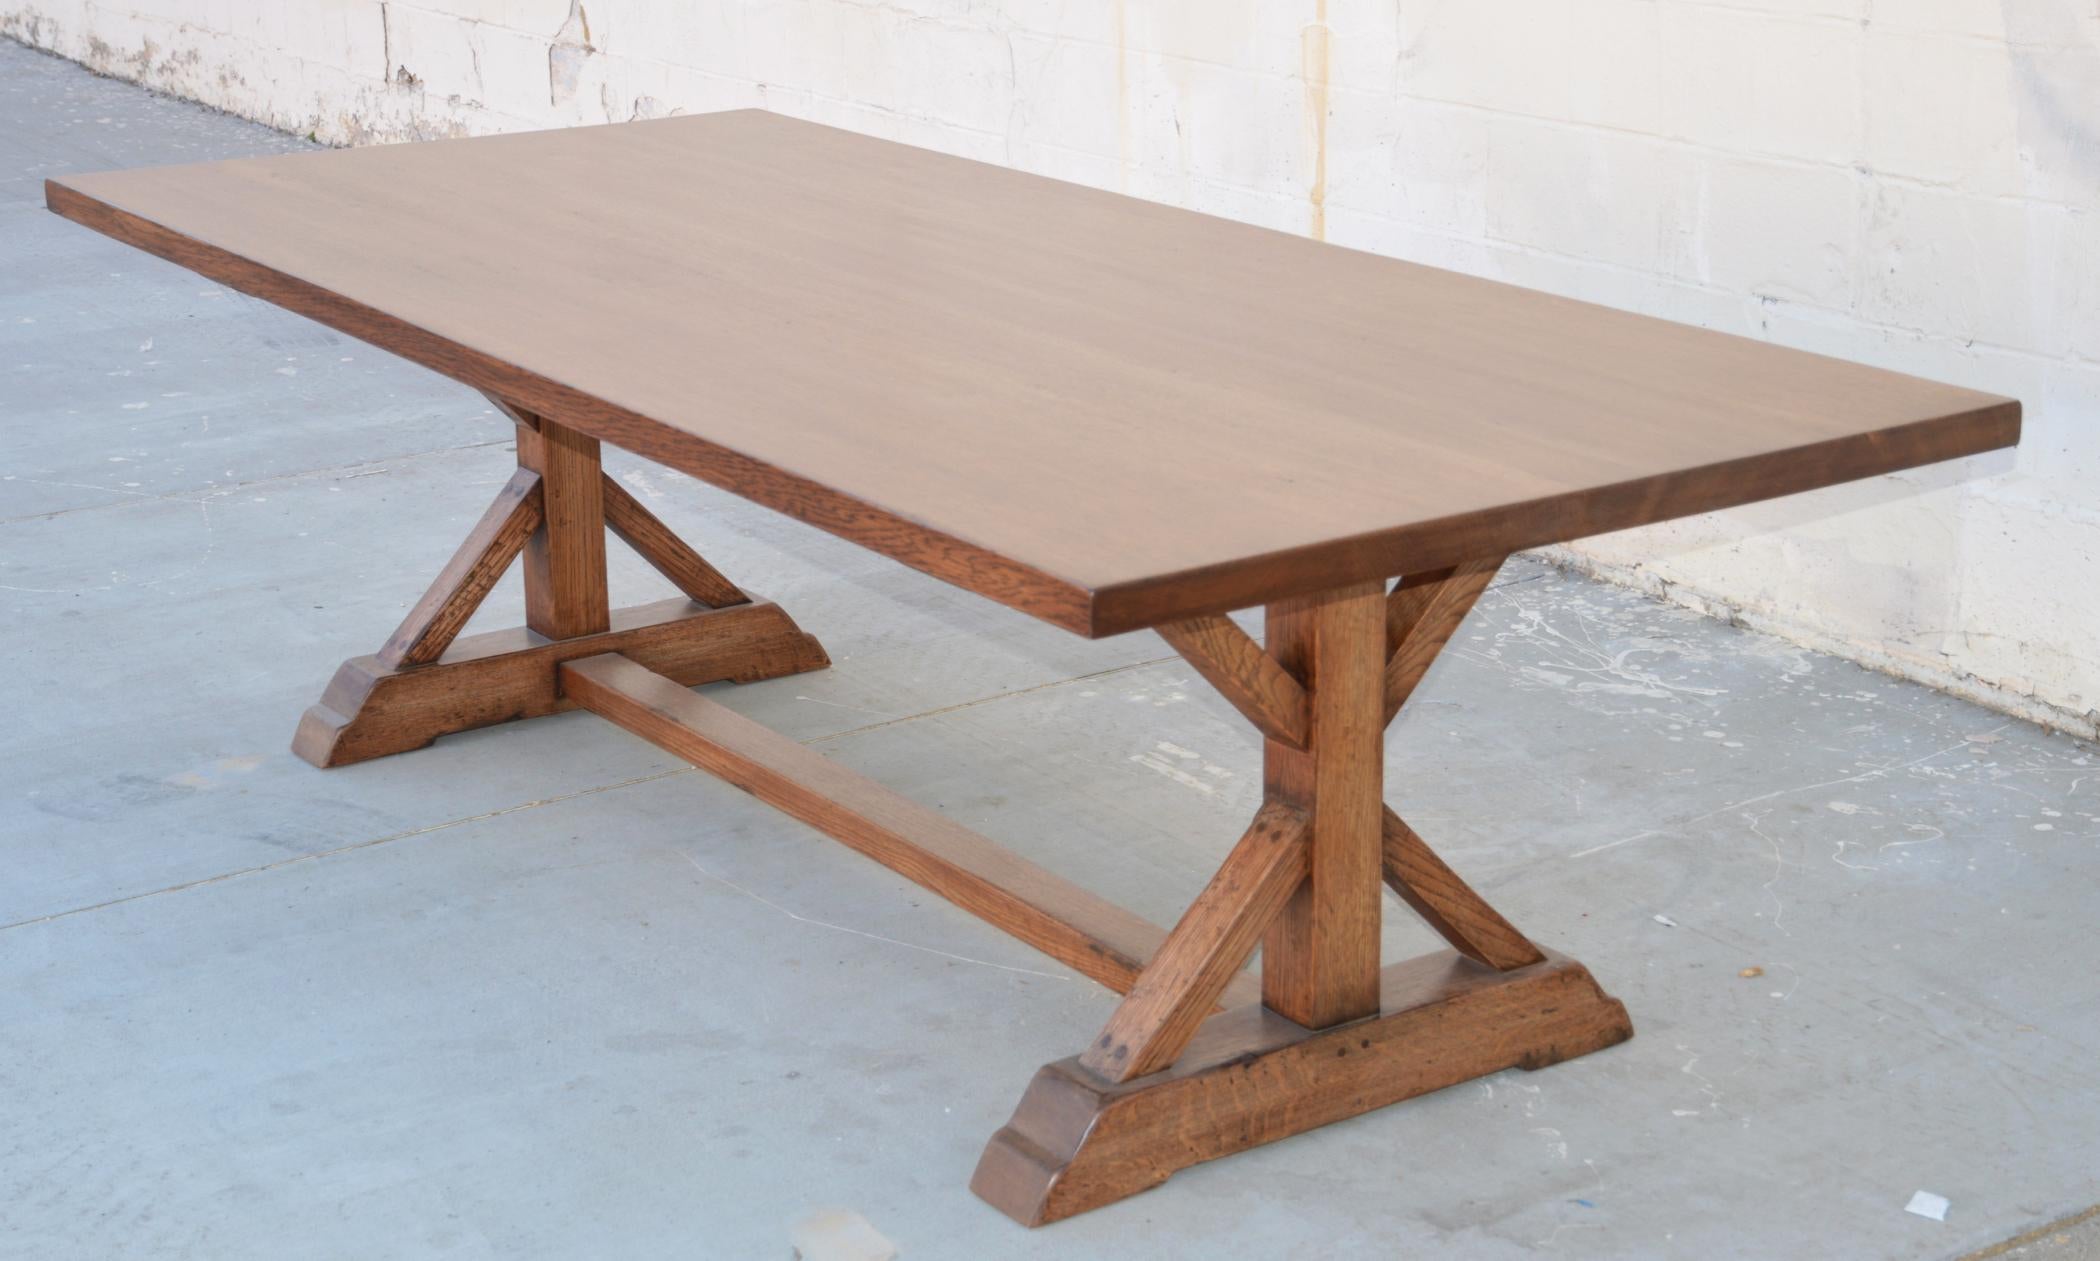 This farm table made from vintage, white oak is seen here in 112